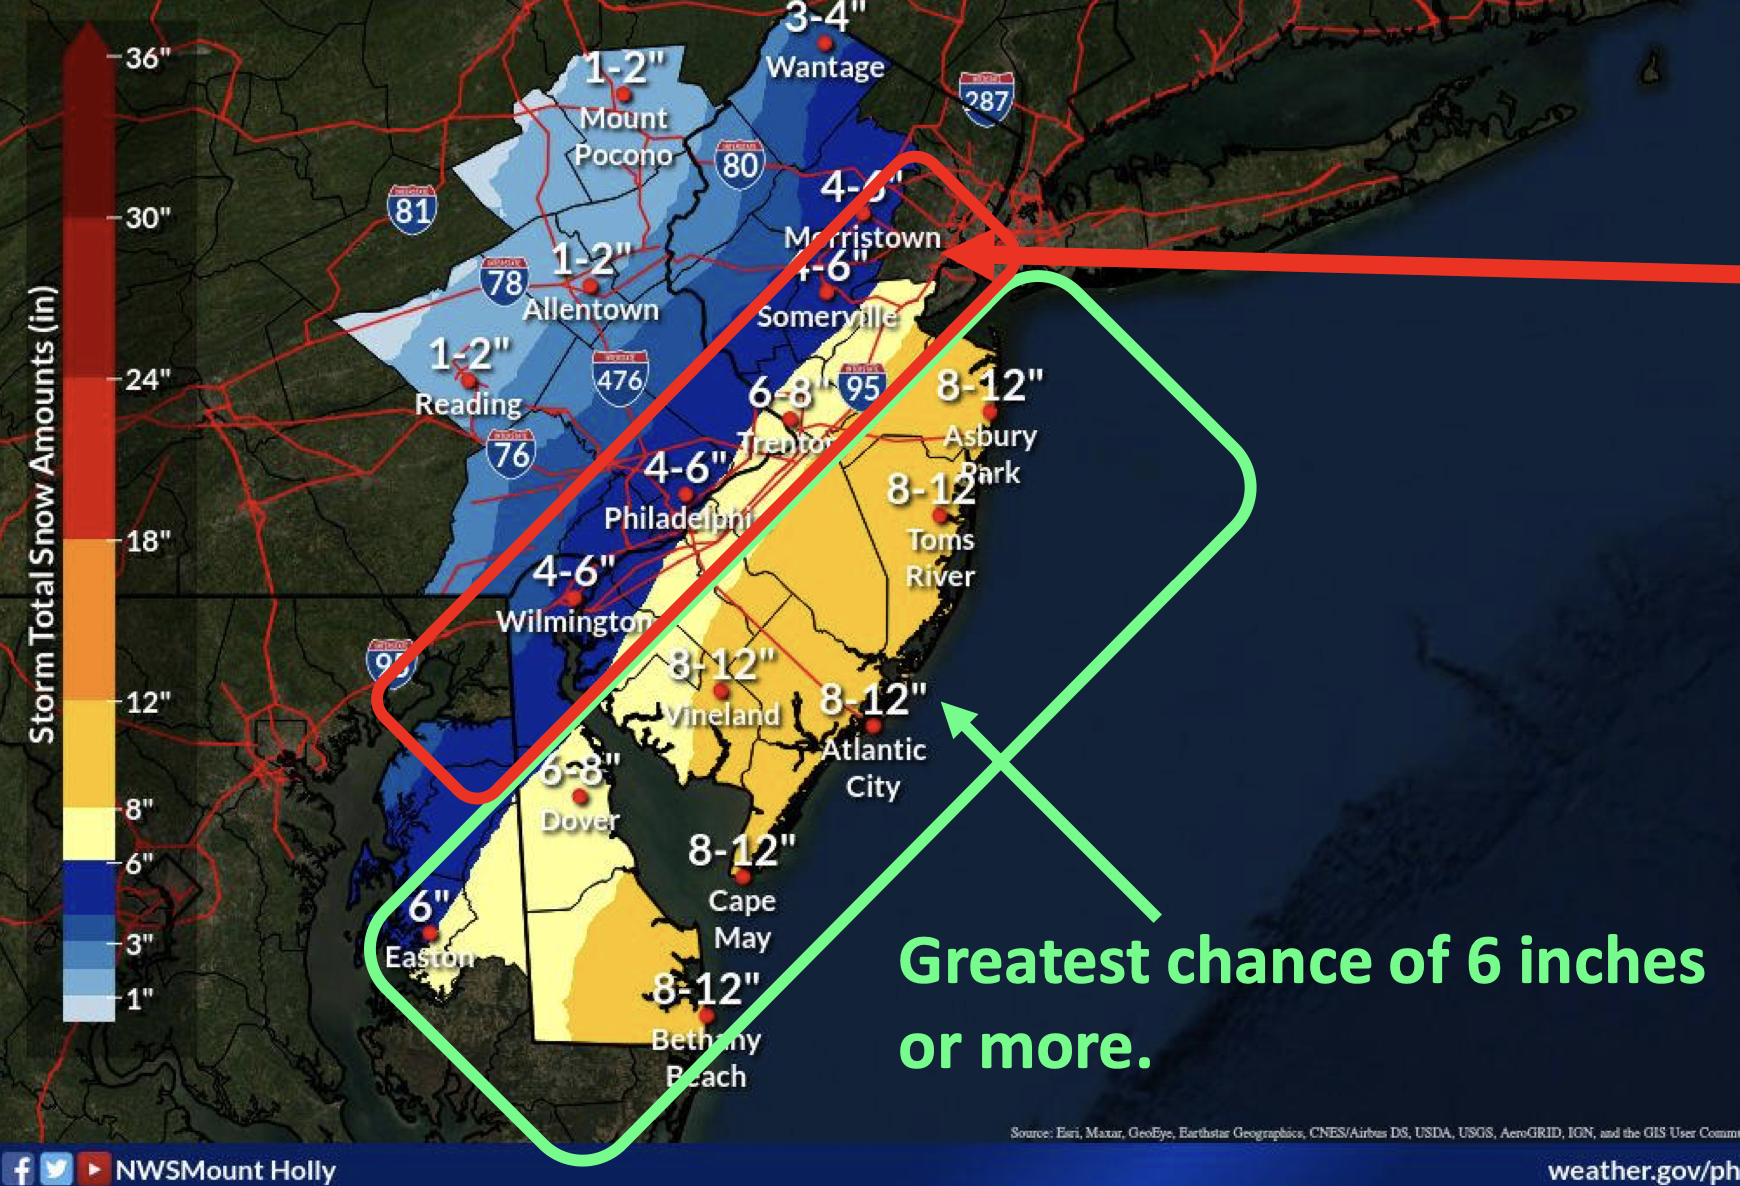 Chances increase for strong winter storm  this weekend